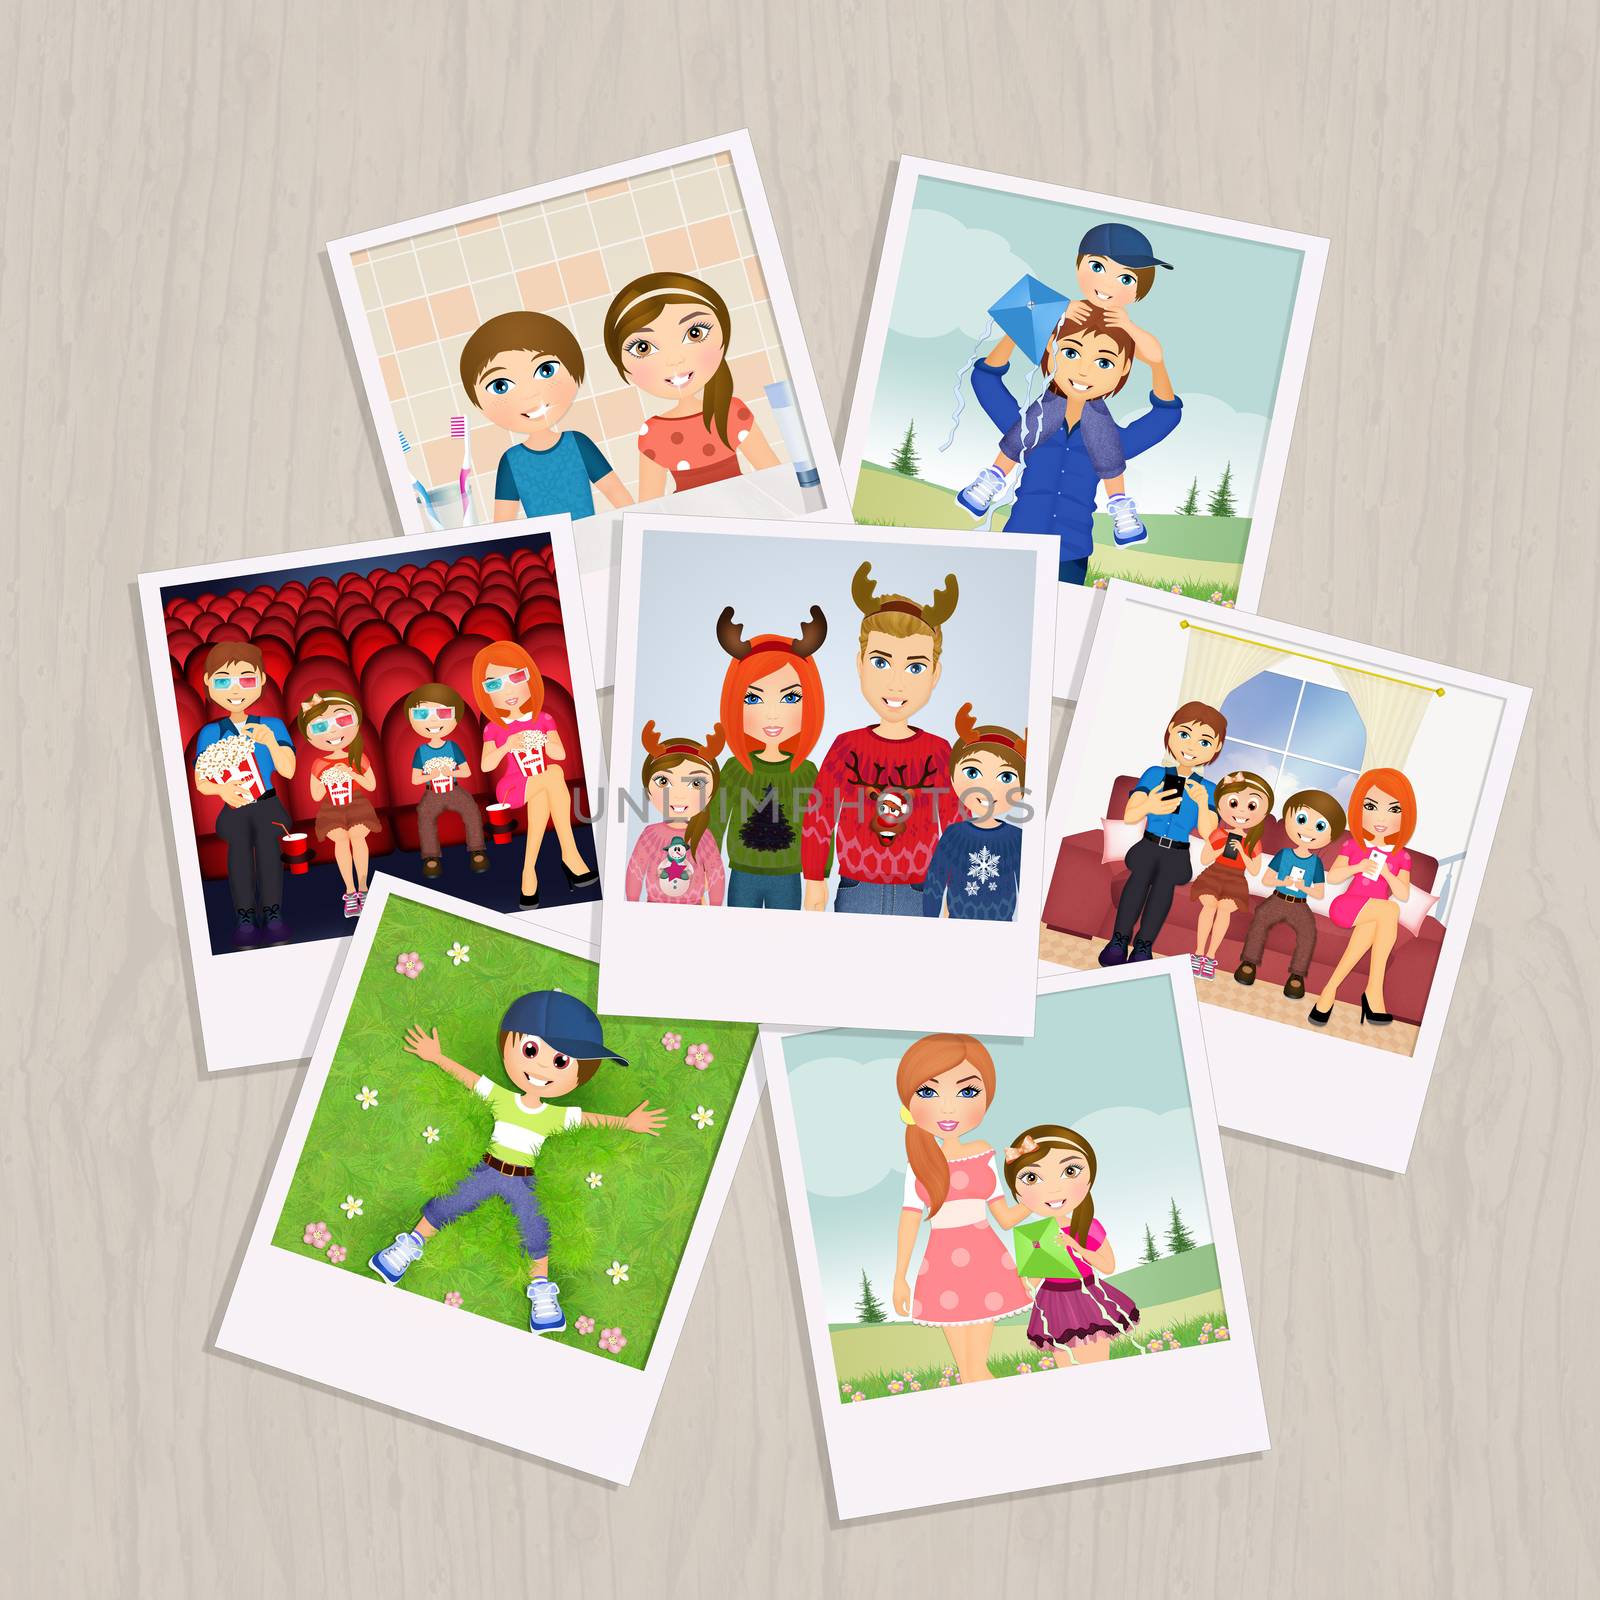 photographs with family memories by adrenalina